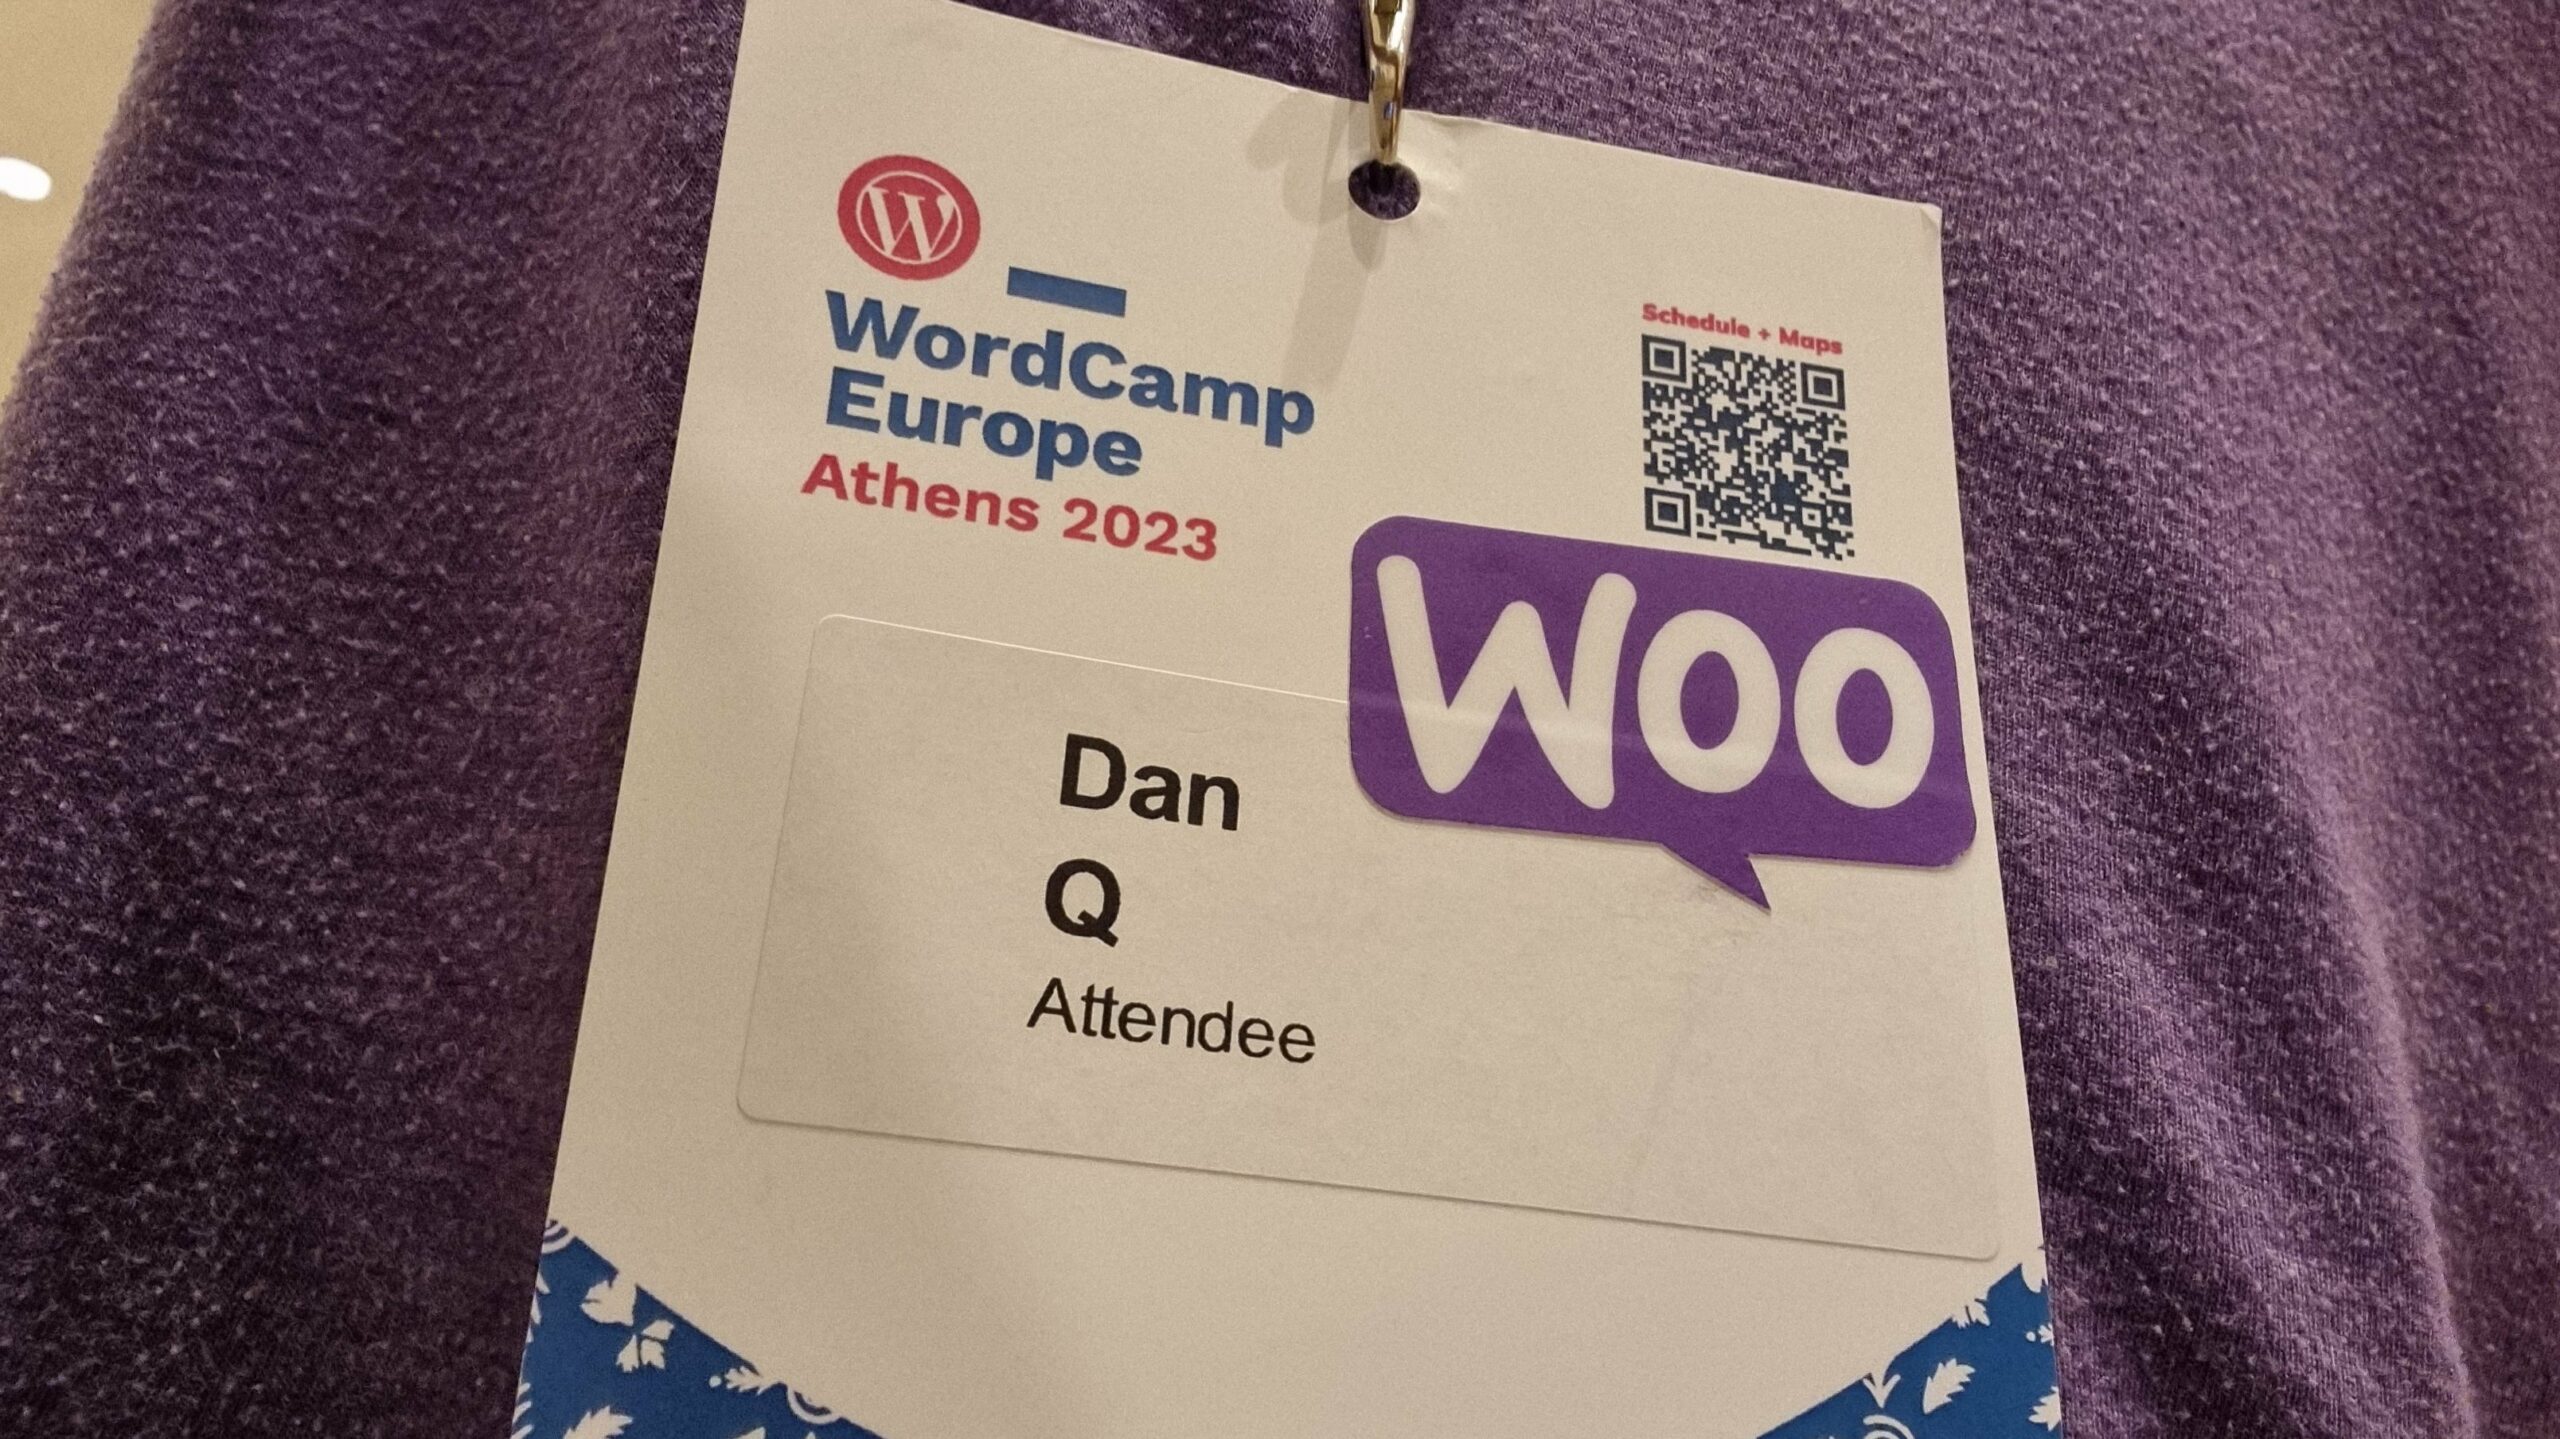 A WordCamp Europe Athens 2023 lanyard and name badge for Dan Q, Attendee, onto which a "Woo" sticker has been affixed.